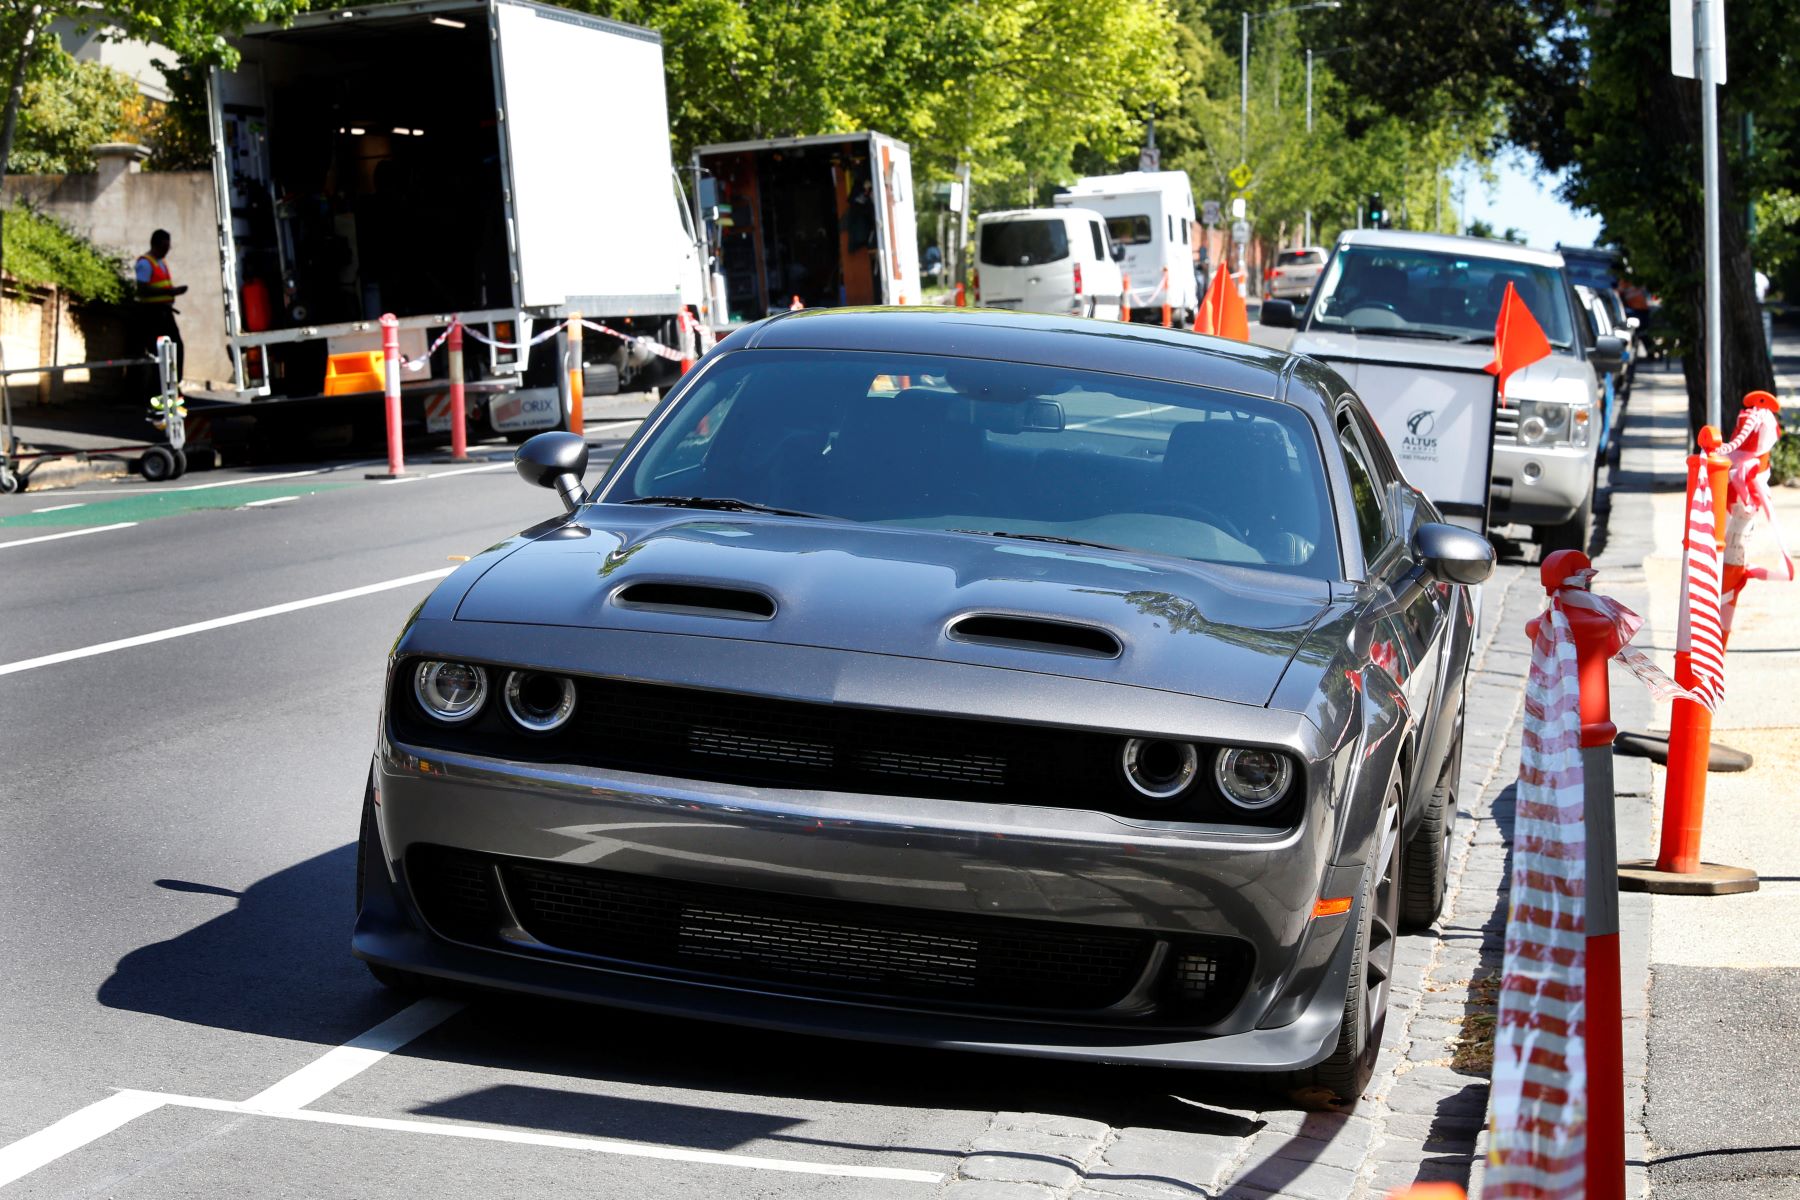 A Dodge Challenger Hellcat model used as a prop during filming for a Liam Neeson movie